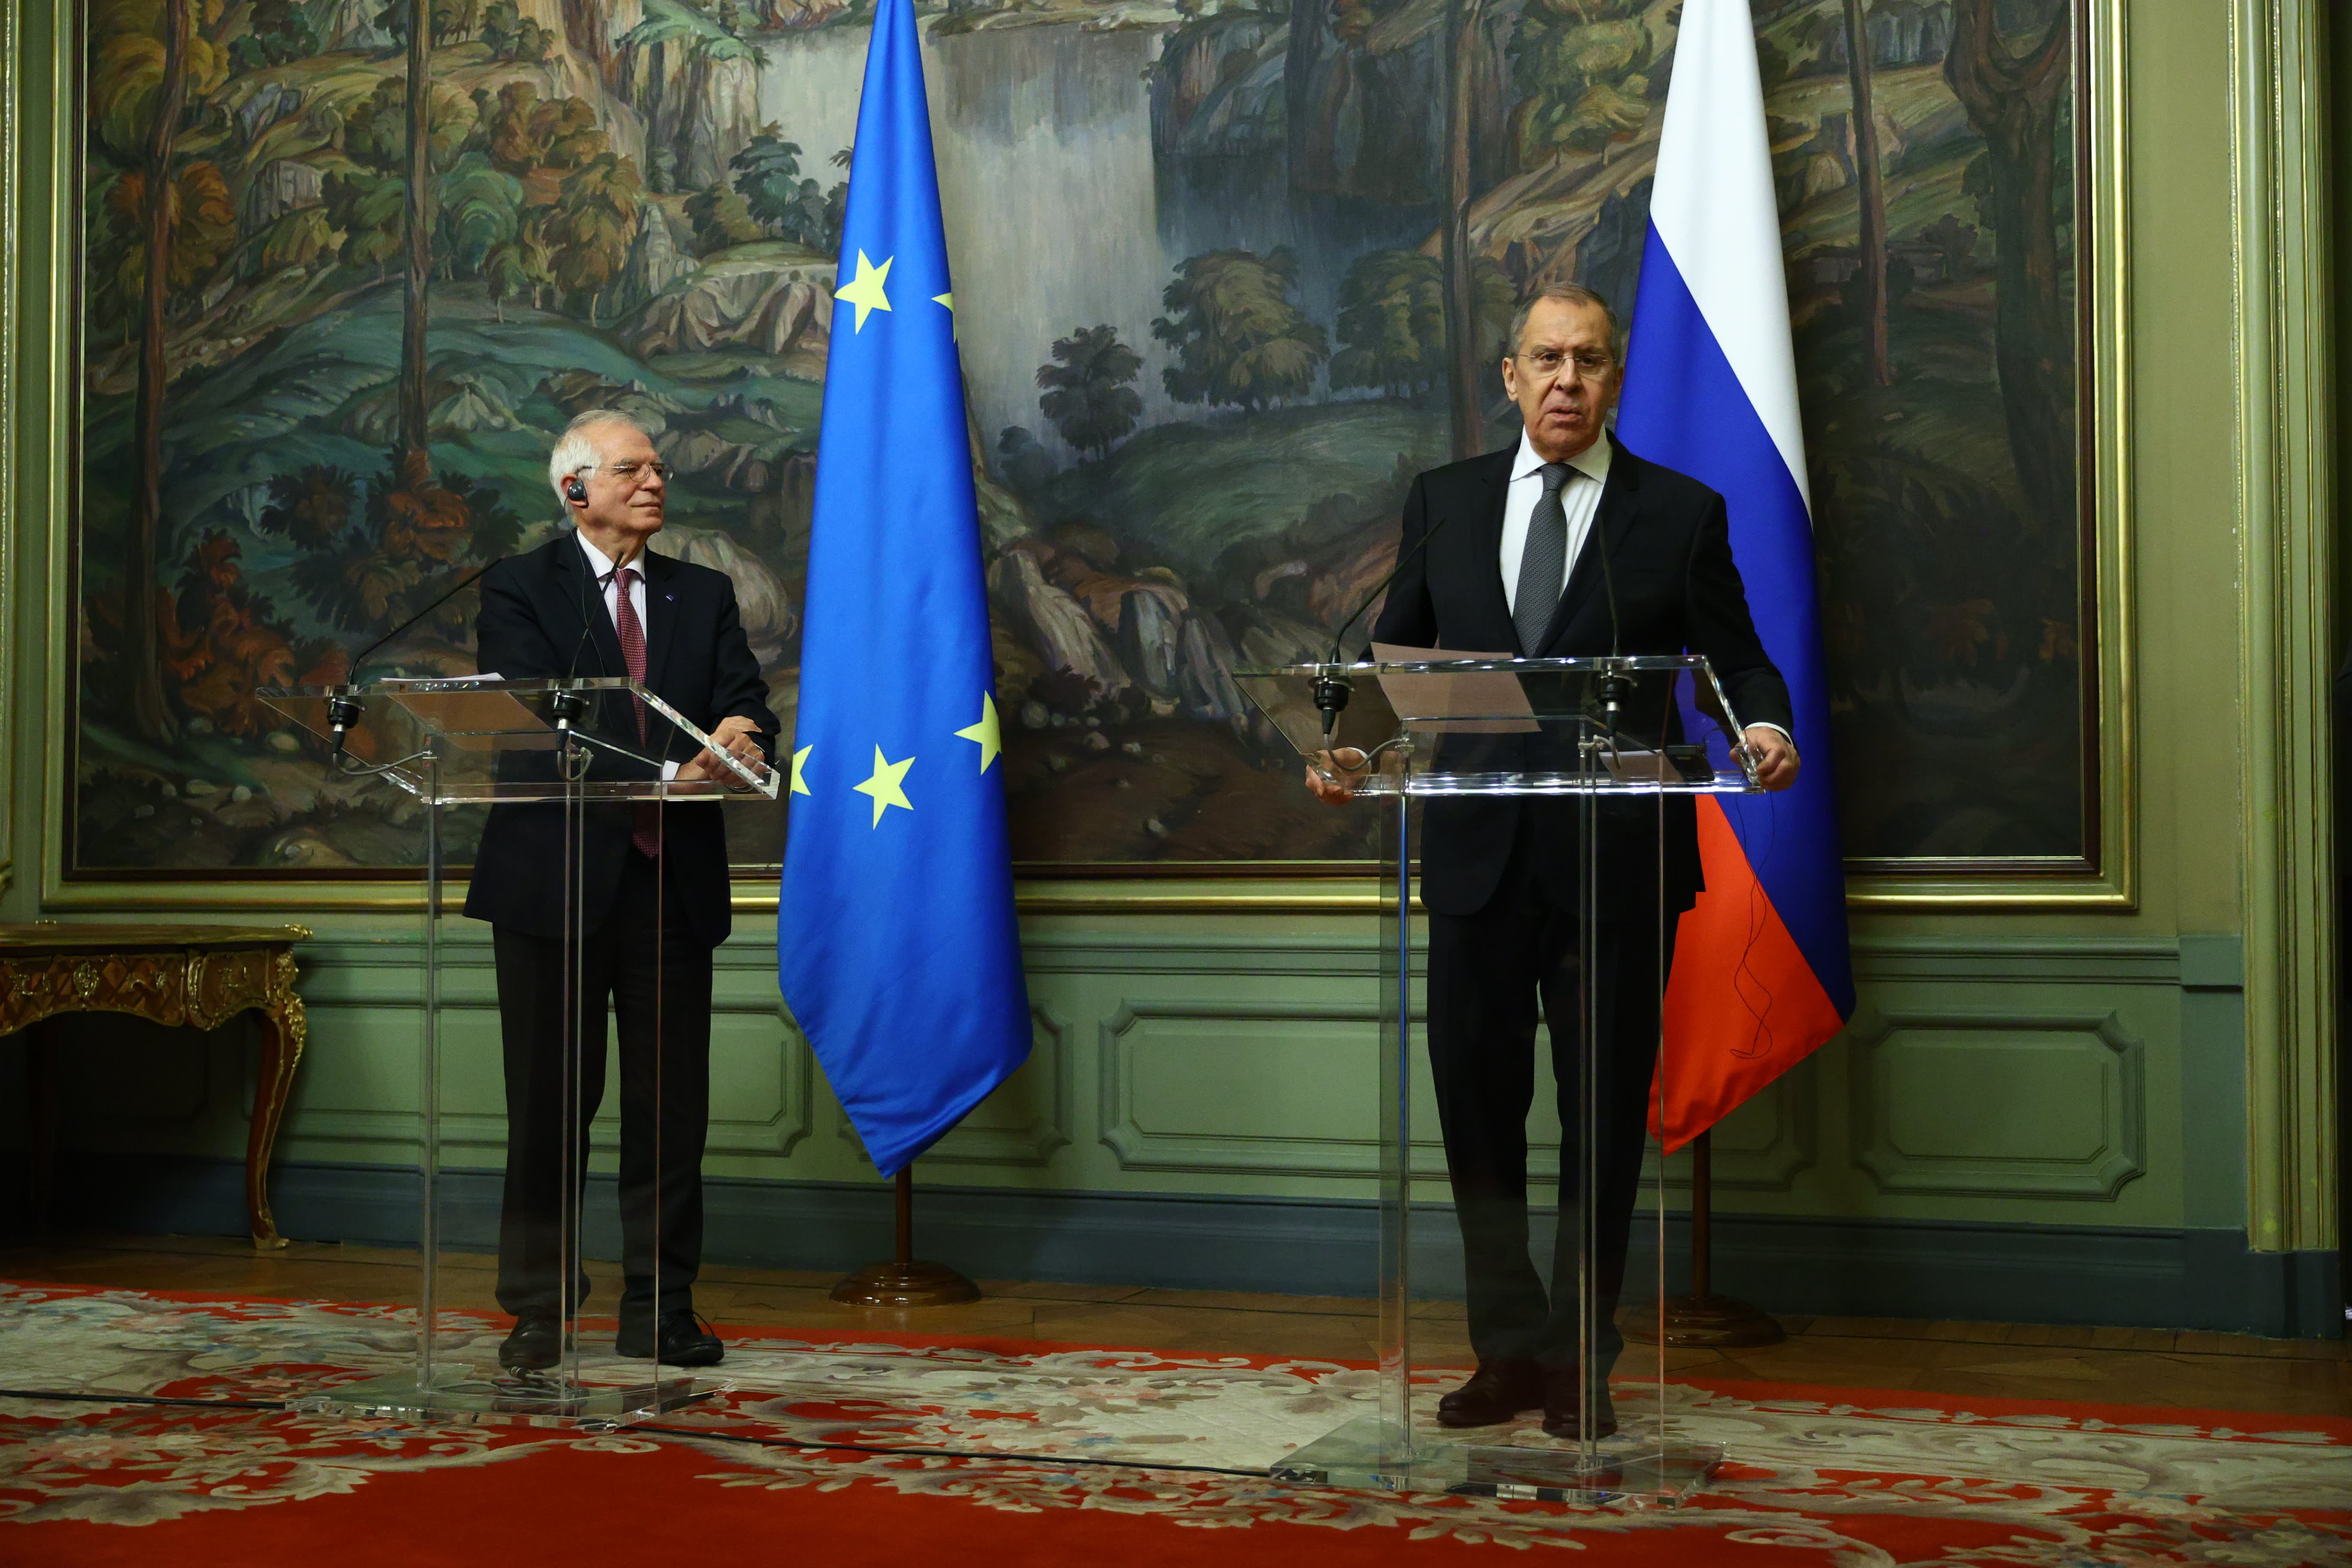 Tensions in Russia and the EU have reached a new low following Lavrov’s comments in Moscow